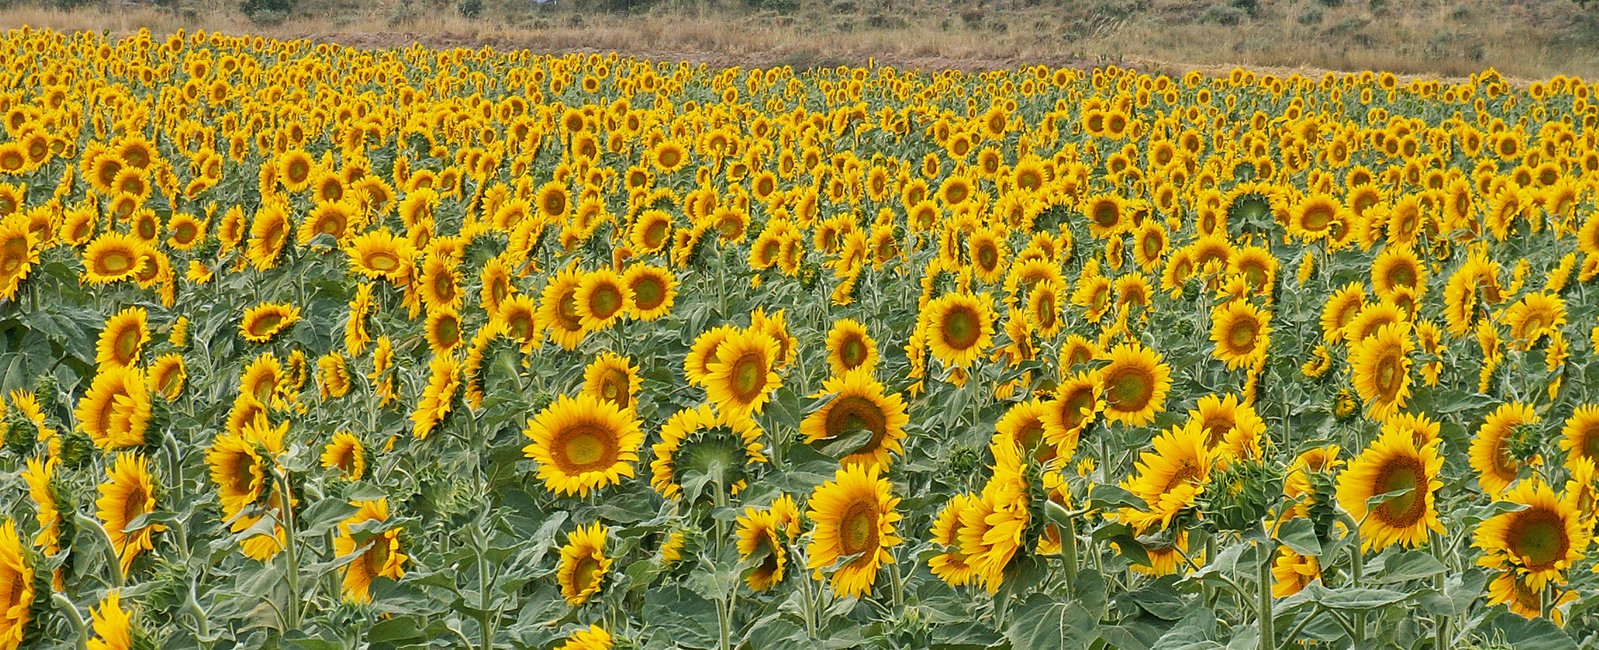 a large field full of a bunch of sunflowers